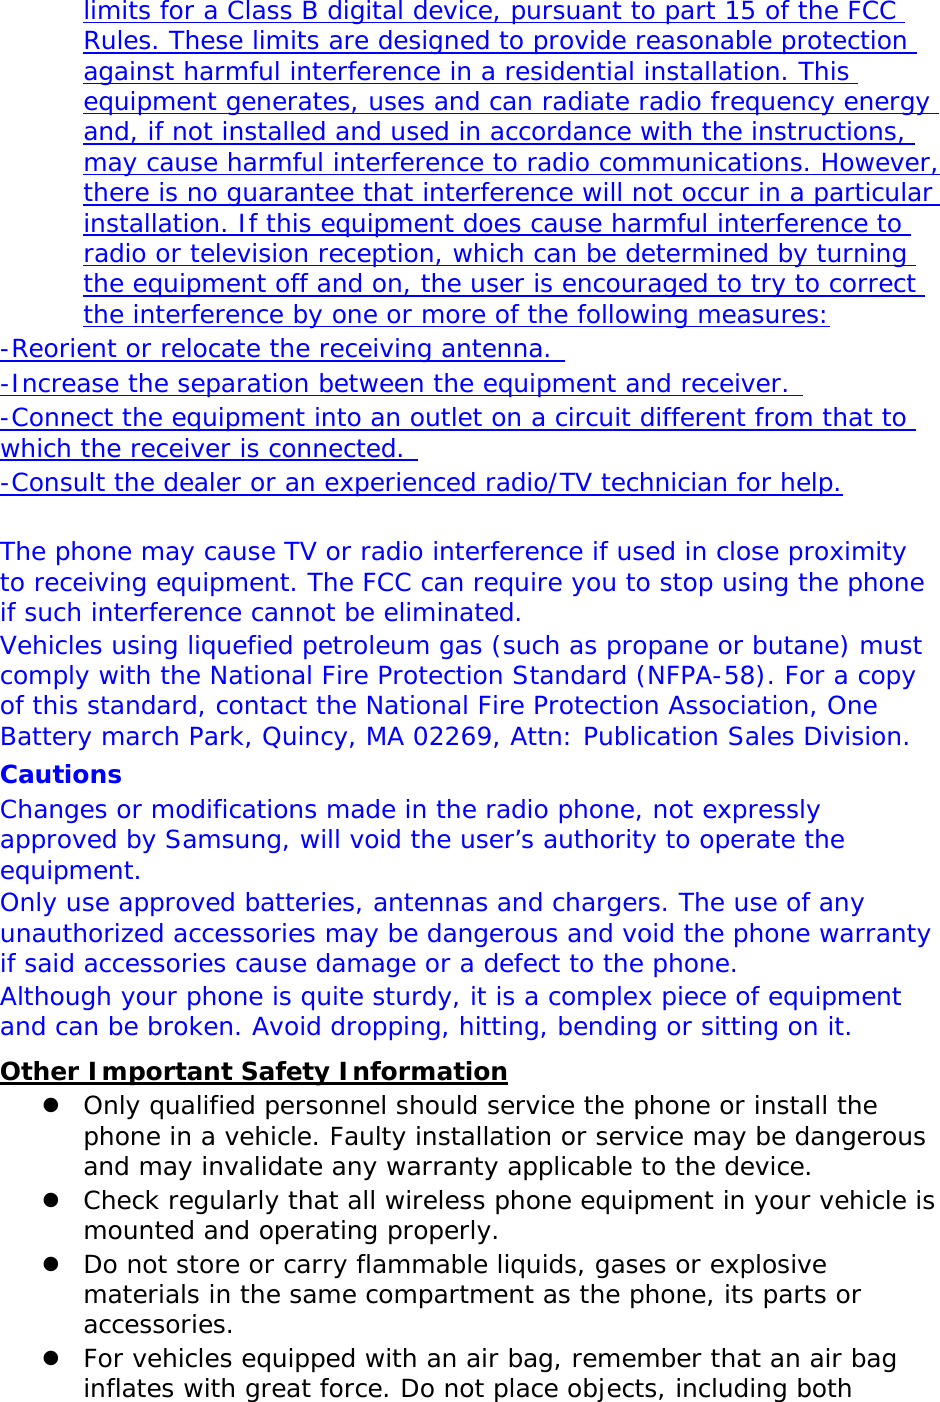 limits for a Class B digital device, pursuant to part 15 of the FCC Rules. These limits are designed to provide reasonable protection against harmful interference in a residential installation. This equipment generates, uses and can radiate radio frequency energy and, if not installed and used in accordance with the instructions, may cause harmful interference to radio communications. However, there is no guarantee that interference will not occur in a particular installation. If this equipment does cause harmful interference to radio or television reception, which can be determined by turning the equipment off and on, the user is encouraged to try to correct the interference by one or more of the following measures: -Reorient or relocate the receiving antenna.  -Increase the separation between the equipment and receiver.  -Connect the equipment into an outlet on a circuit different from that to which the receiver is connected.  -Consult the dealer or an experienced radio/TV technician for help.  The phone may cause TV or radio interference if used in close proximity to receiving equipment. The FCC can require you to stop using the phone if such interference cannot be eliminated. Vehicles using liquefied petroleum gas (such as propane or butane) must comply with the National Fire Protection Standard (NFPA-58). For a copy of this standard, contact the National Fire Protection Association, One Battery march Park, Quincy, MA 02269, Attn: Publication Sales Division. Cautions Changes or modifications made in the radio phone, not expressly approved by Samsung, will void the user’s authority to operate the equipment. Only use approved batteries, antennas and chargers. The use of any unauthorized accessories may be dangerous and void the phone warranty if said accessories cause damage or a defect to the phone. Although your phone is quite sturdy, it is a complex piece of equipment and can be broken. Avoid dropping, hitting, bending or sitting on it. Other Important Safety Information  Only qualified personnel should service the phone or install the phone in a vehicle. Faulty installation or service may be dangerous and may invalidate any warranty applicable to the device.  Check regularly that all wireless phone equipment in your vehicle is mounted and operating properly.  Do not store or carry flammable liquids, gases or explosive materials in the same compartment as the phone, its parts or accessories.  For vehicles equipped with an air bag, remember that an air bag inflates with great force. Do not place objects, including both 